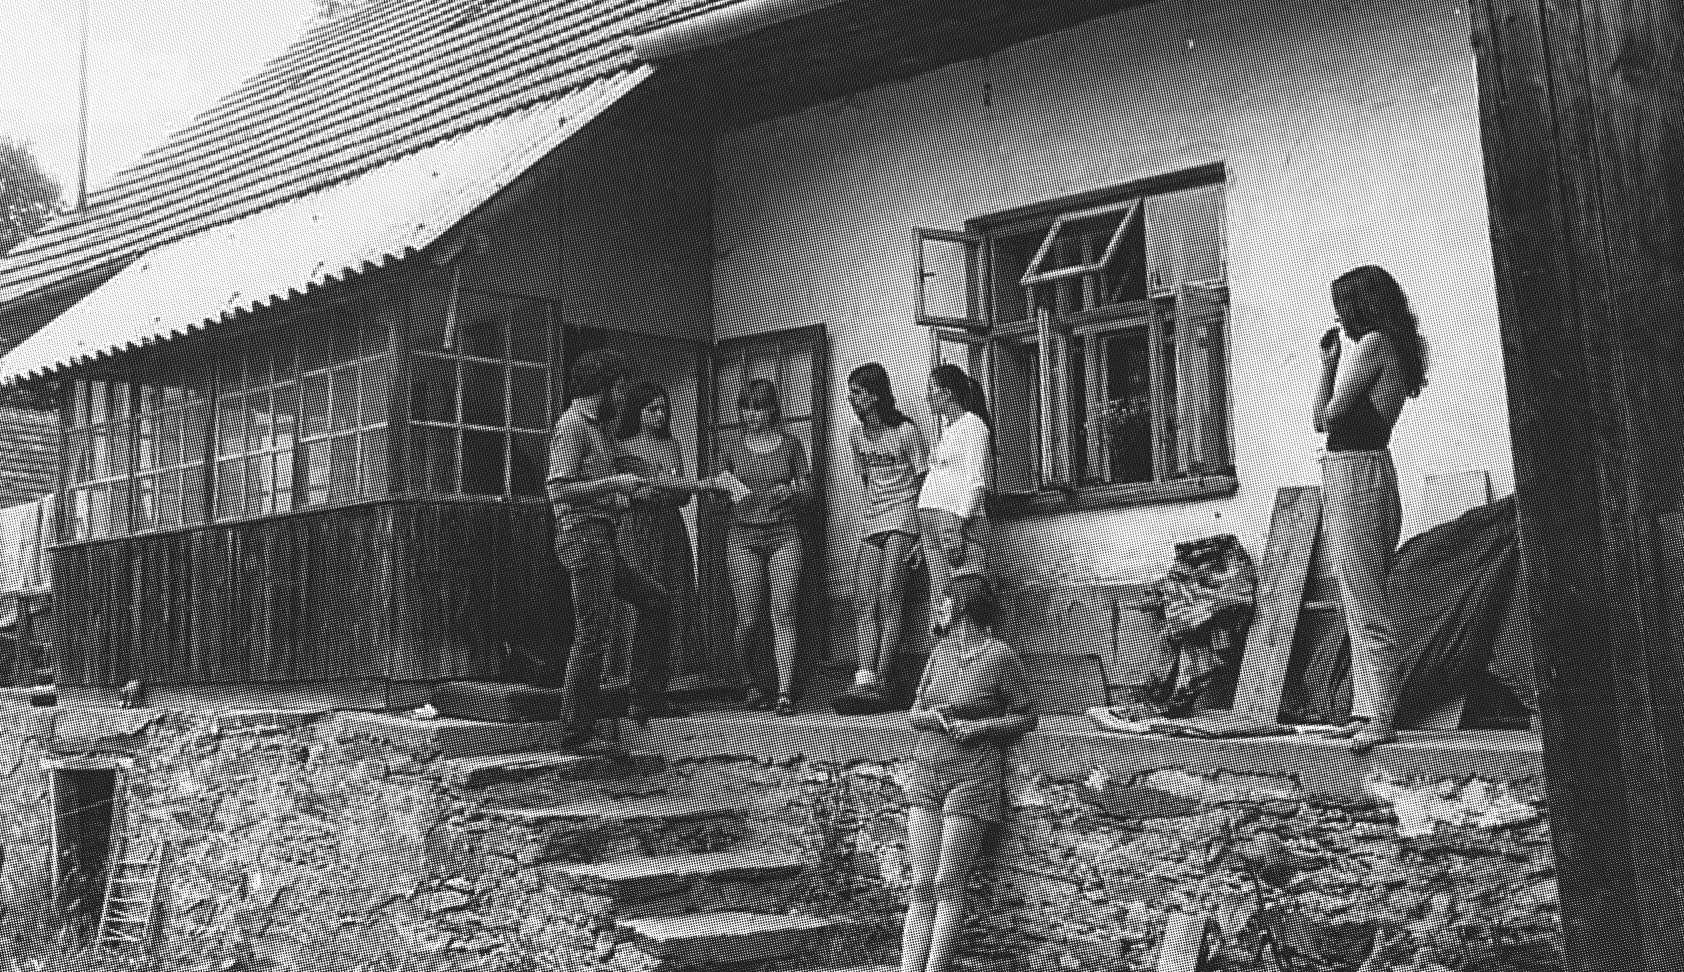 Czech Dissidents Gathering Somewhere in Bohemia, photograph by Jef Helmer, 1982